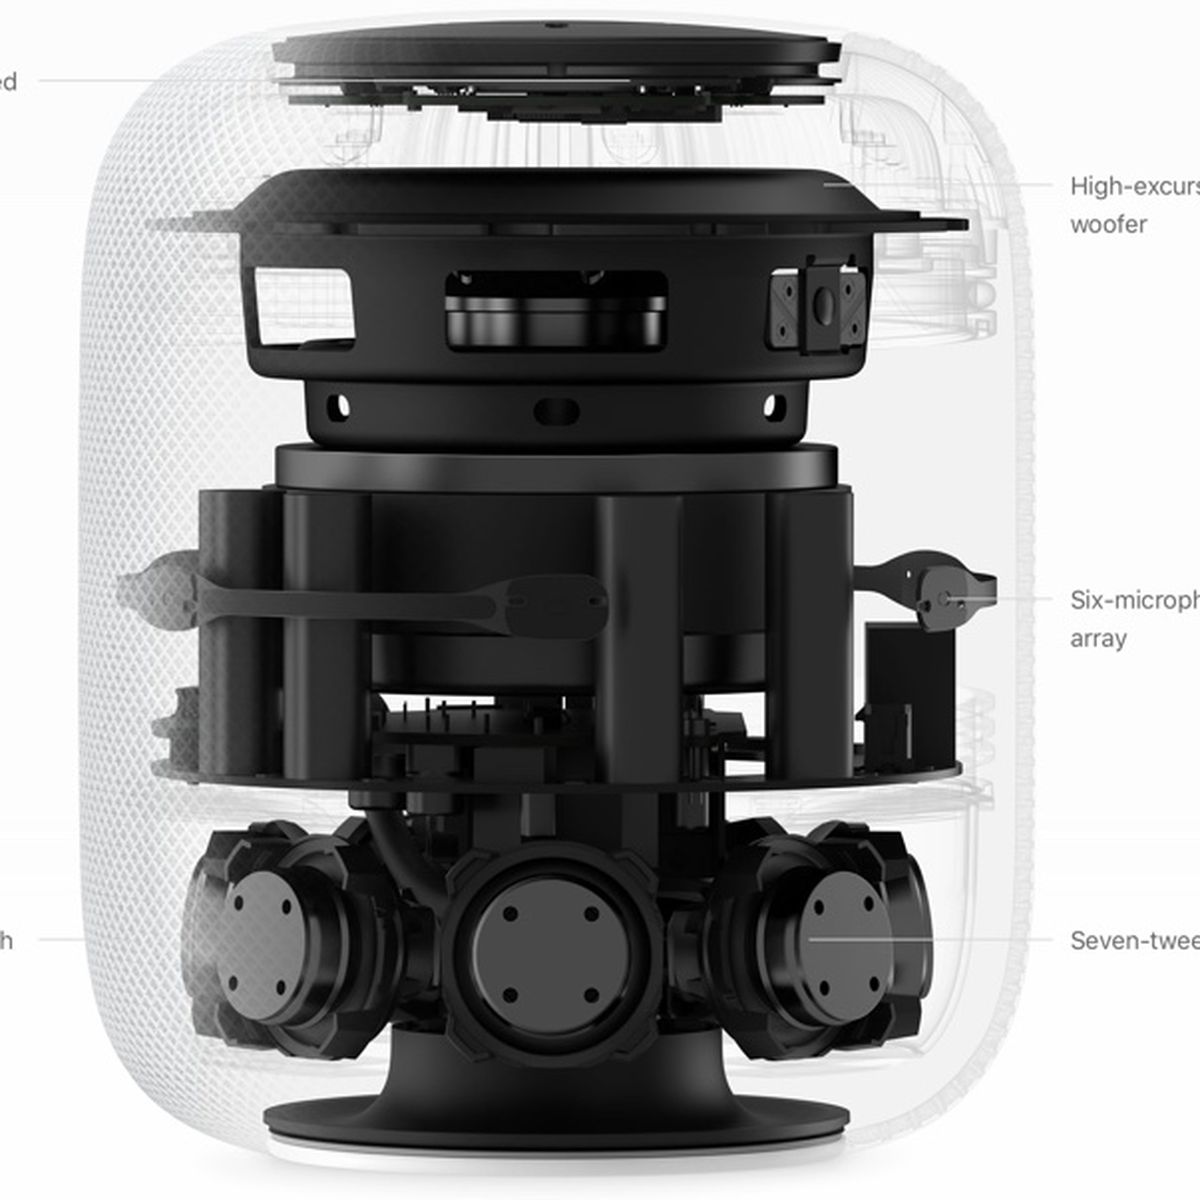 HomePod Costs an Estimated $216 to Make - MacRumors